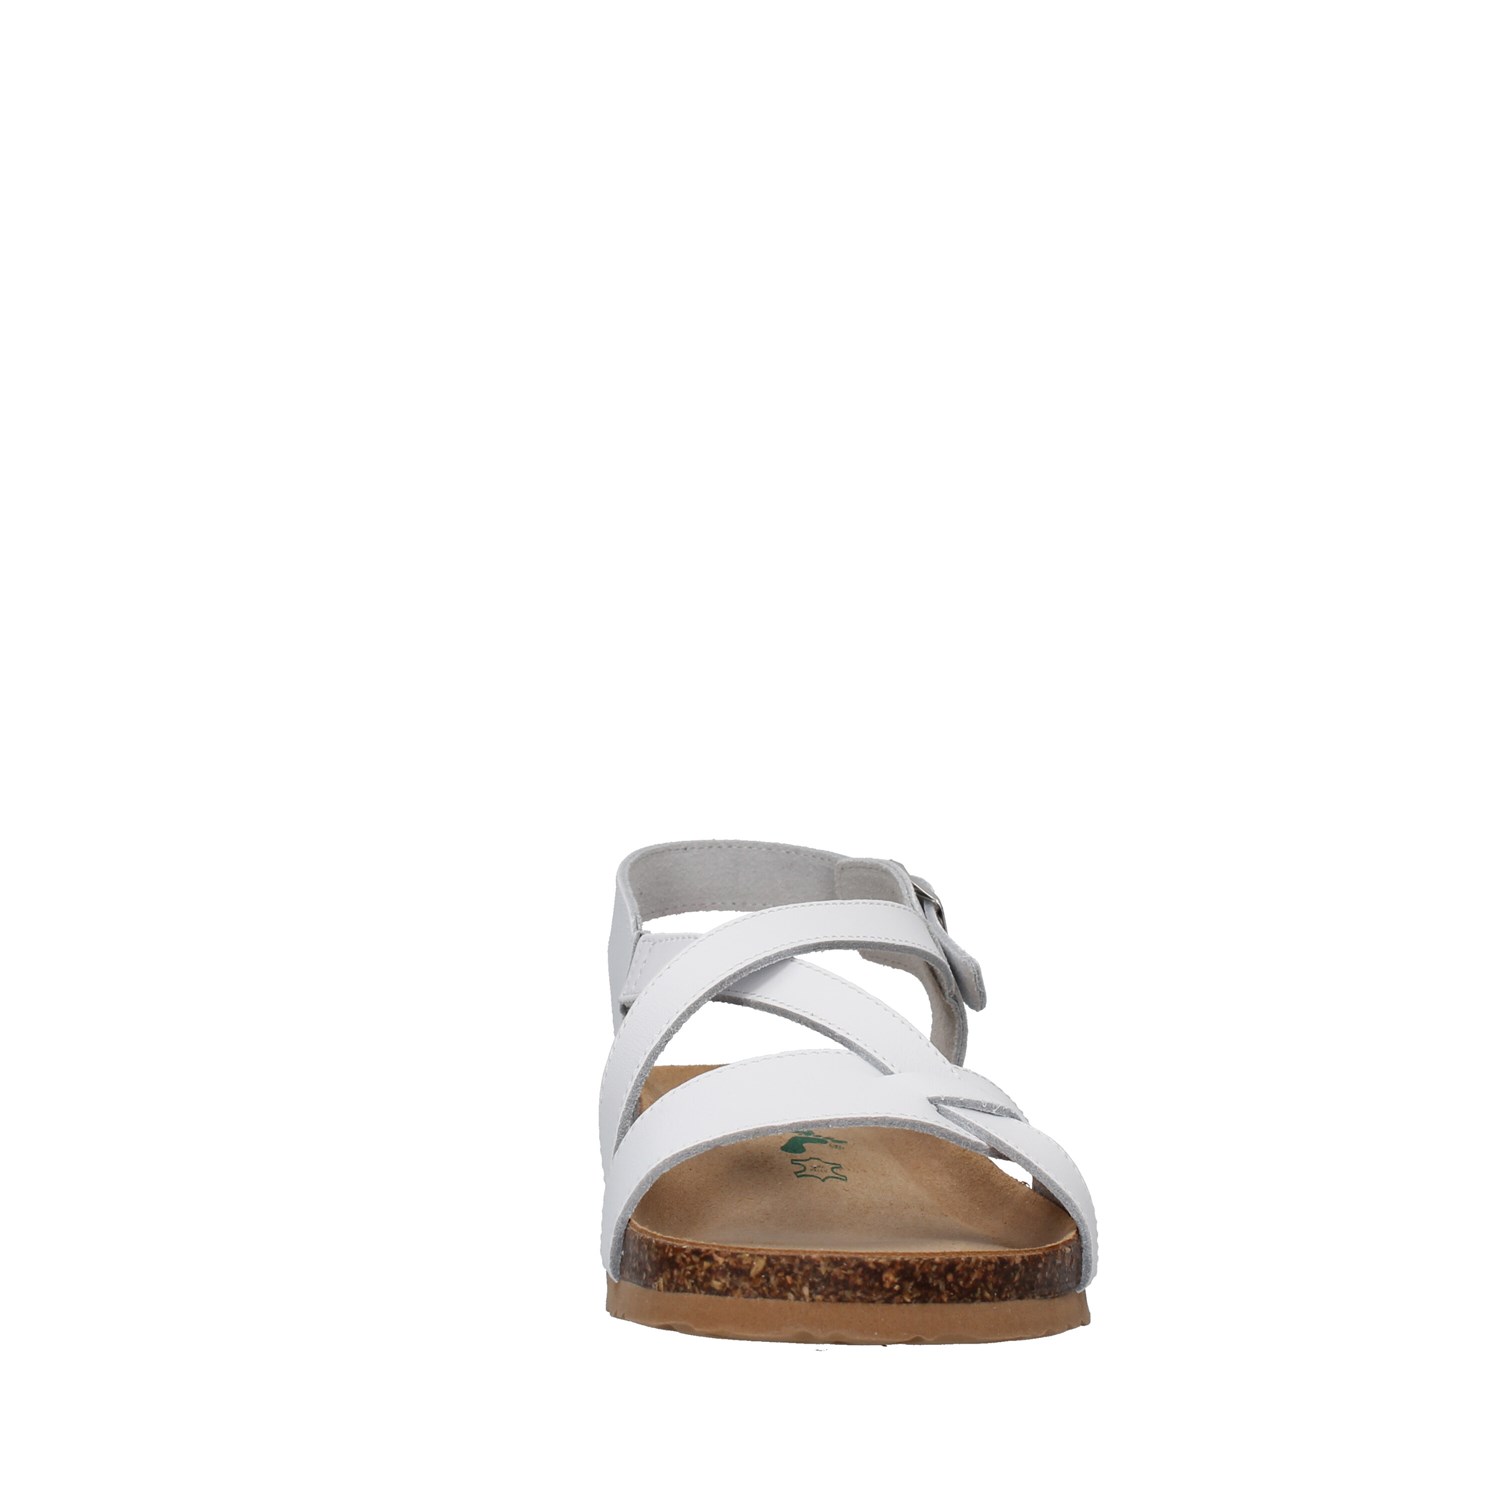 Bionatura Shoes Woman With wedge WHITE 12A826